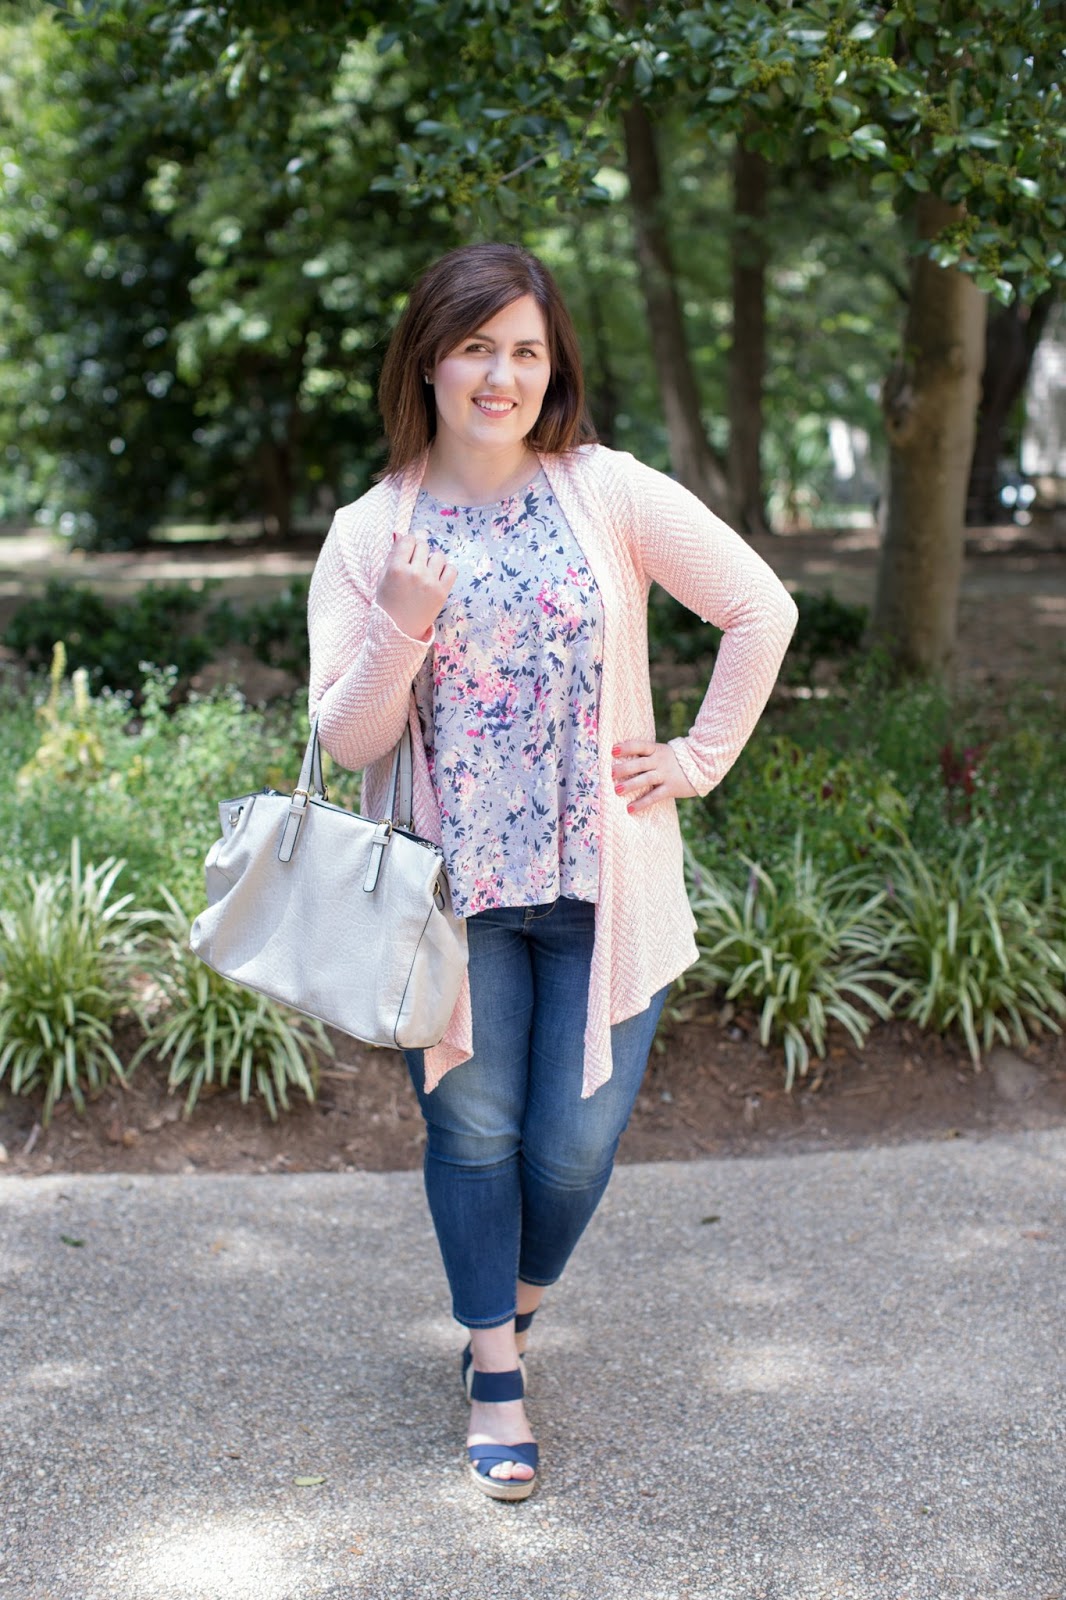 Rebecca Lately Floral Top Pink Chevron Cardigan Old Navy Rockstar Jeans Navy Wedges